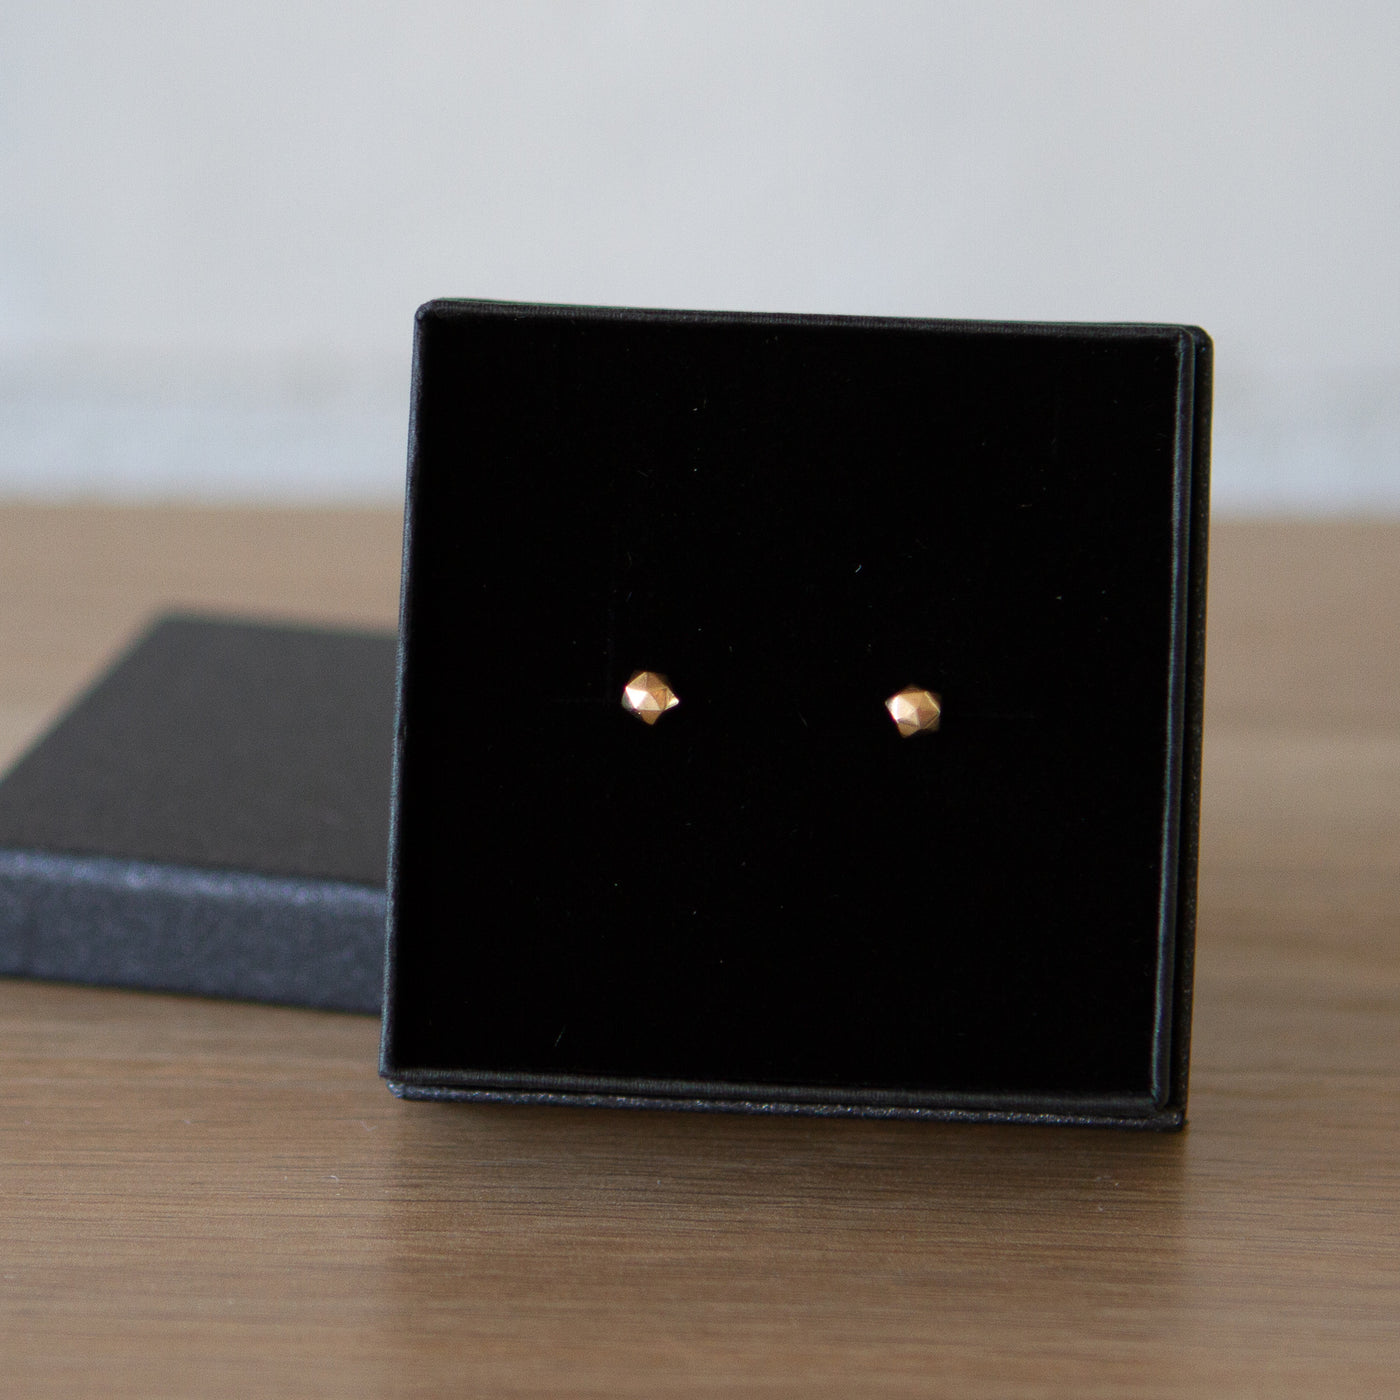 extra small faceted rose gold micro fragment stud earrings in a gift box